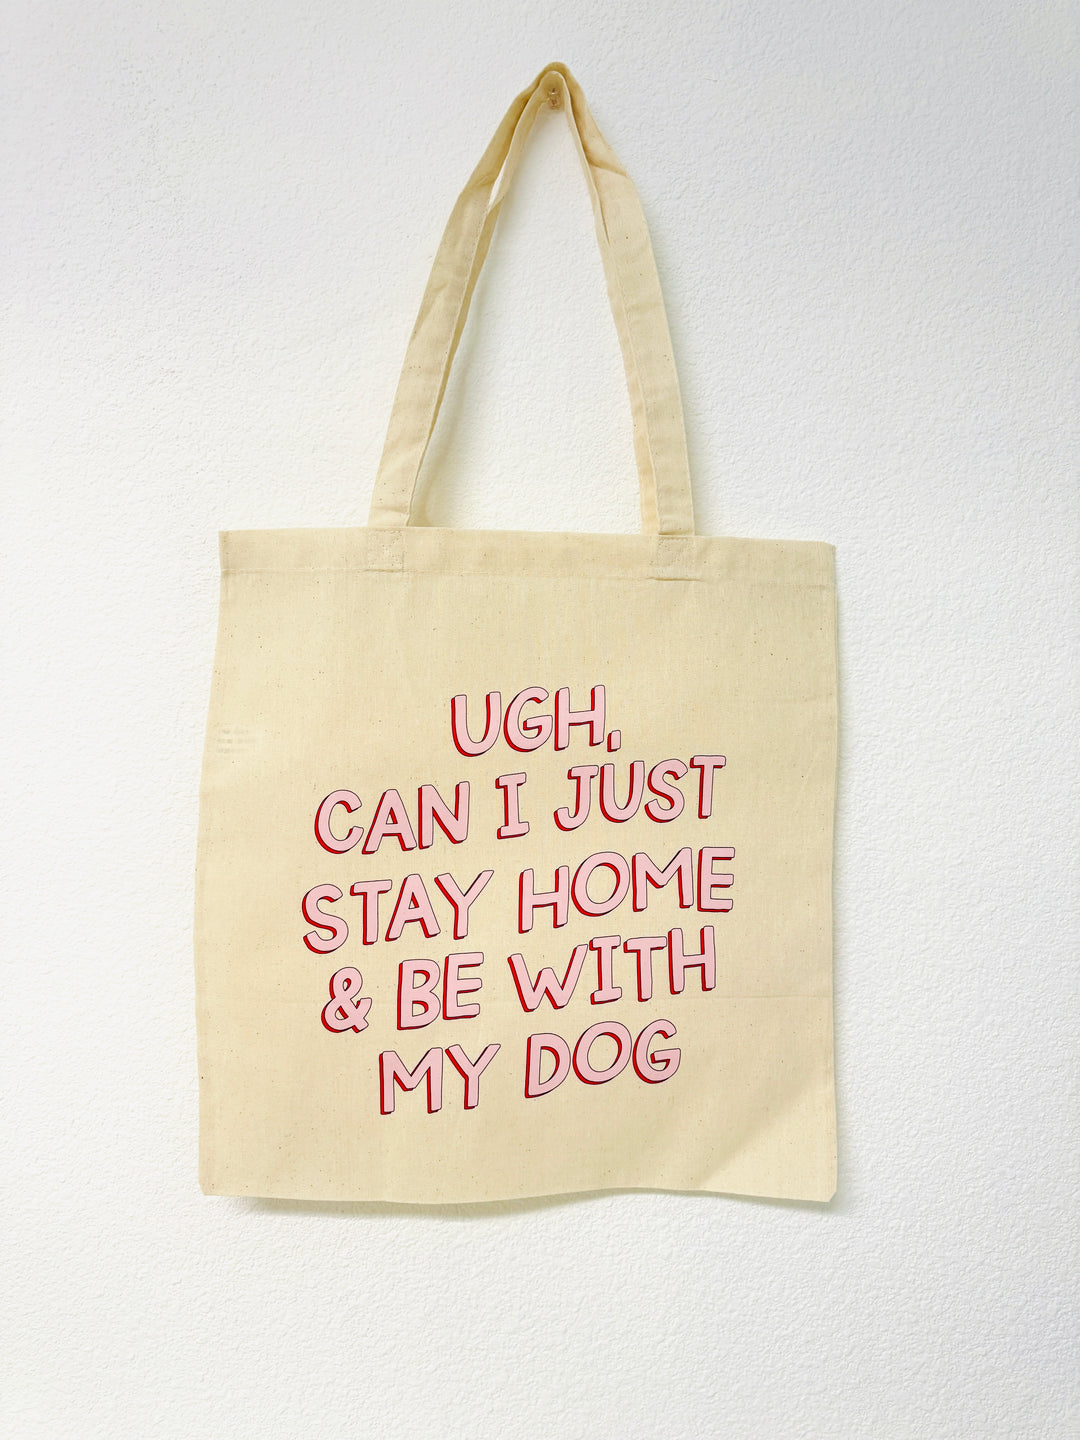 Ugh, Can I Just Stay Home & Be With My Dog Canvas Tote Bag